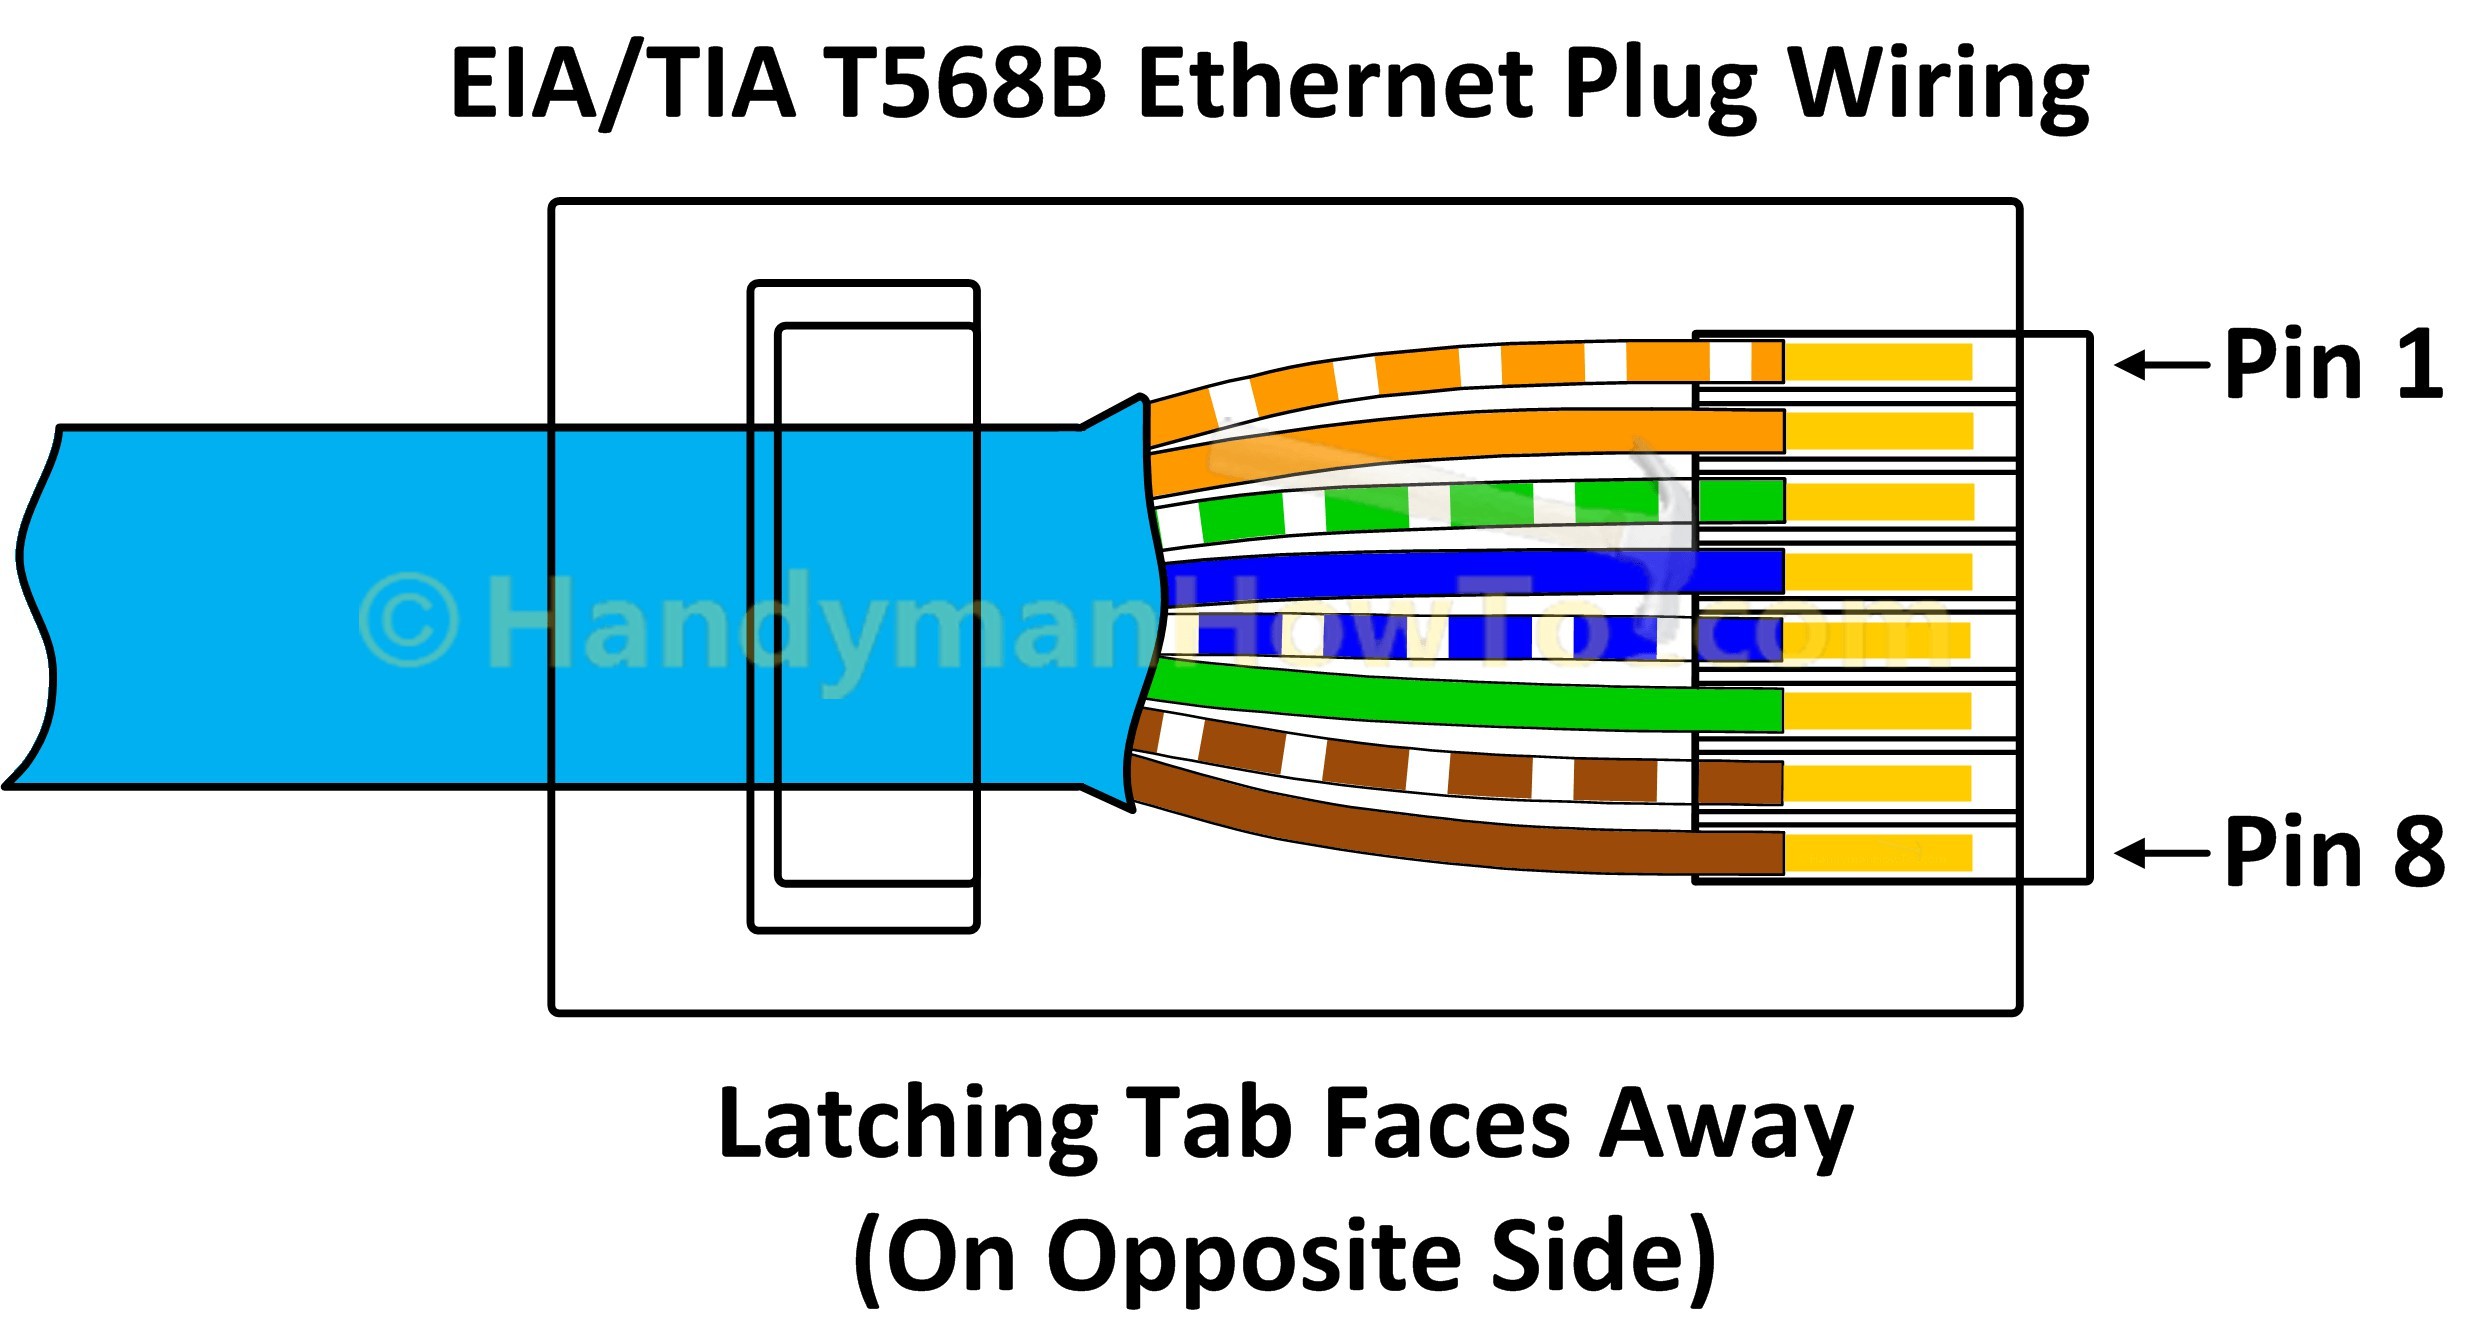 ideal rj45 wiring diagram free image about wiring diagram wire rh lakitiki co RJ45 Wall